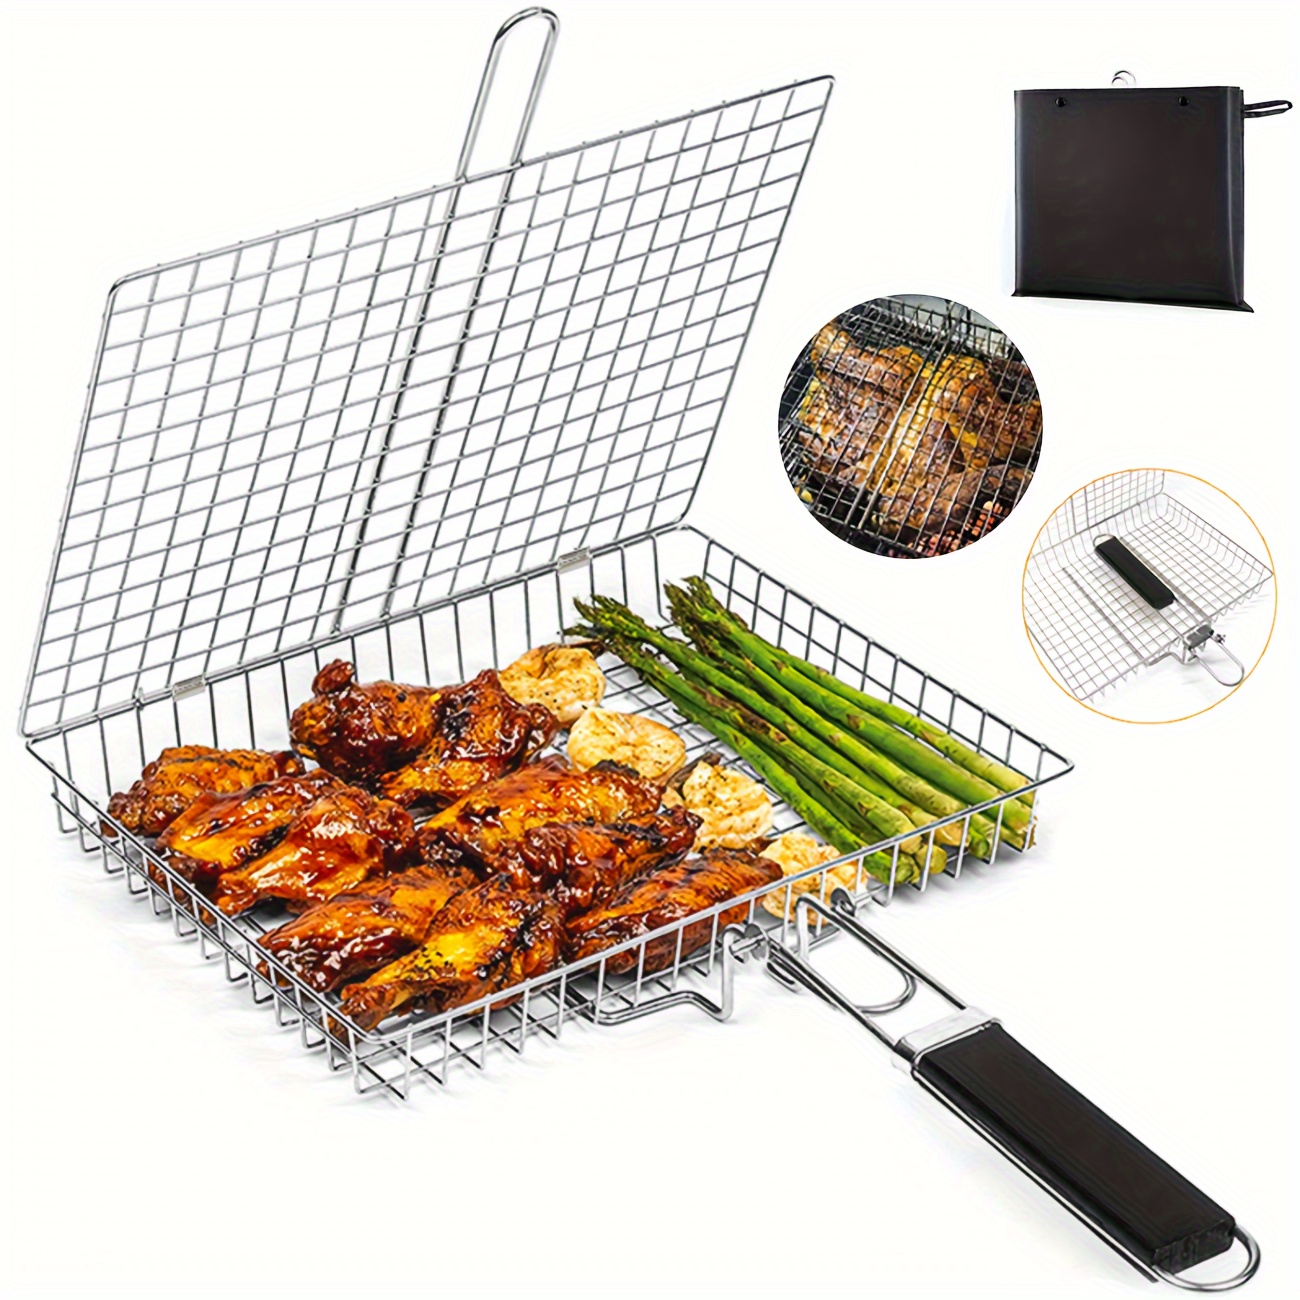 VISEKA BBQ Net Tube 2PCS Stainless Steel Rolling Grill Basket Wire Mesh  Cylinder Portable Barbecue Rack for Grilling Vegetables, Chicken, Meat  (Size 